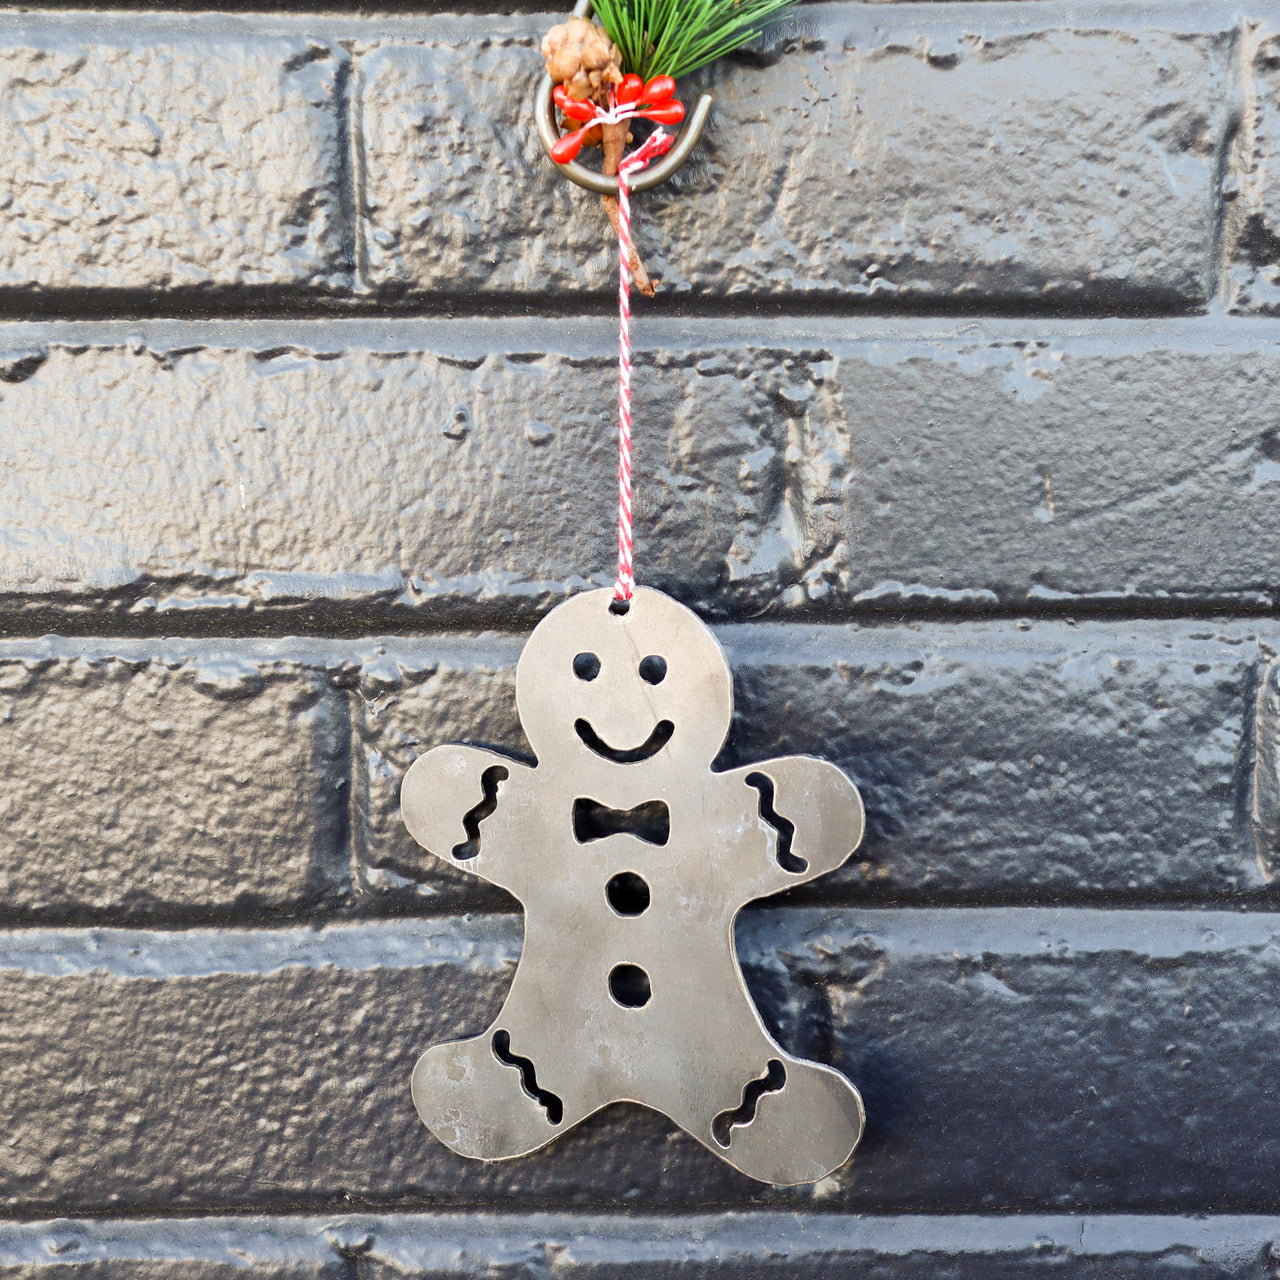 Gingerbread Man Christmas Ornament - Cookie Holiday Stocking Stuffer Gift - Tree Home Decor